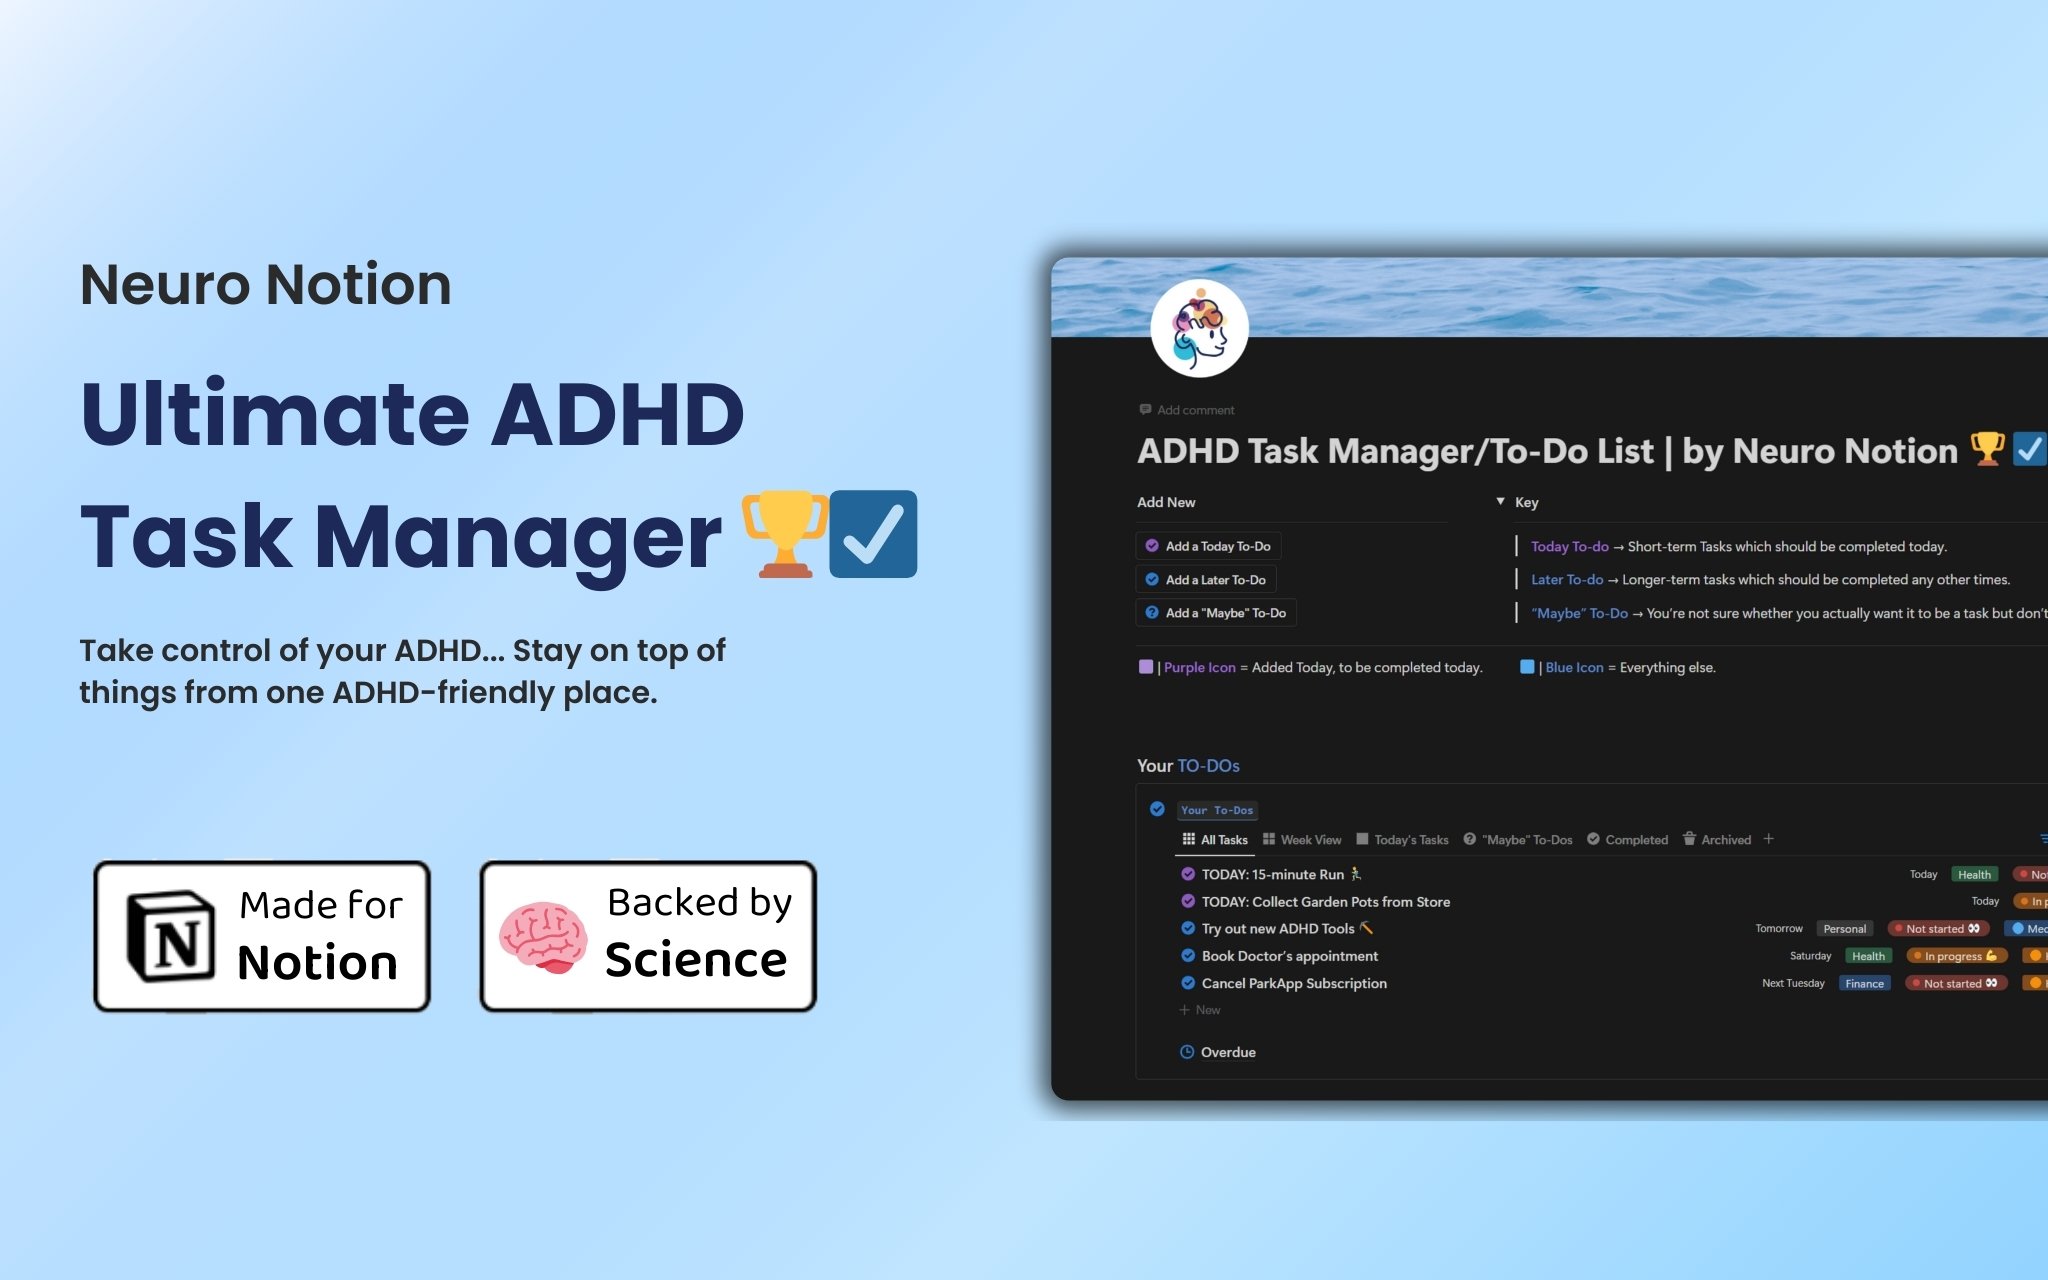 Neuro Notion's ADHD Task Manager / To-Do List is the first Task Manager built around and scientifically designed specifically for the ADHD brain 🧠